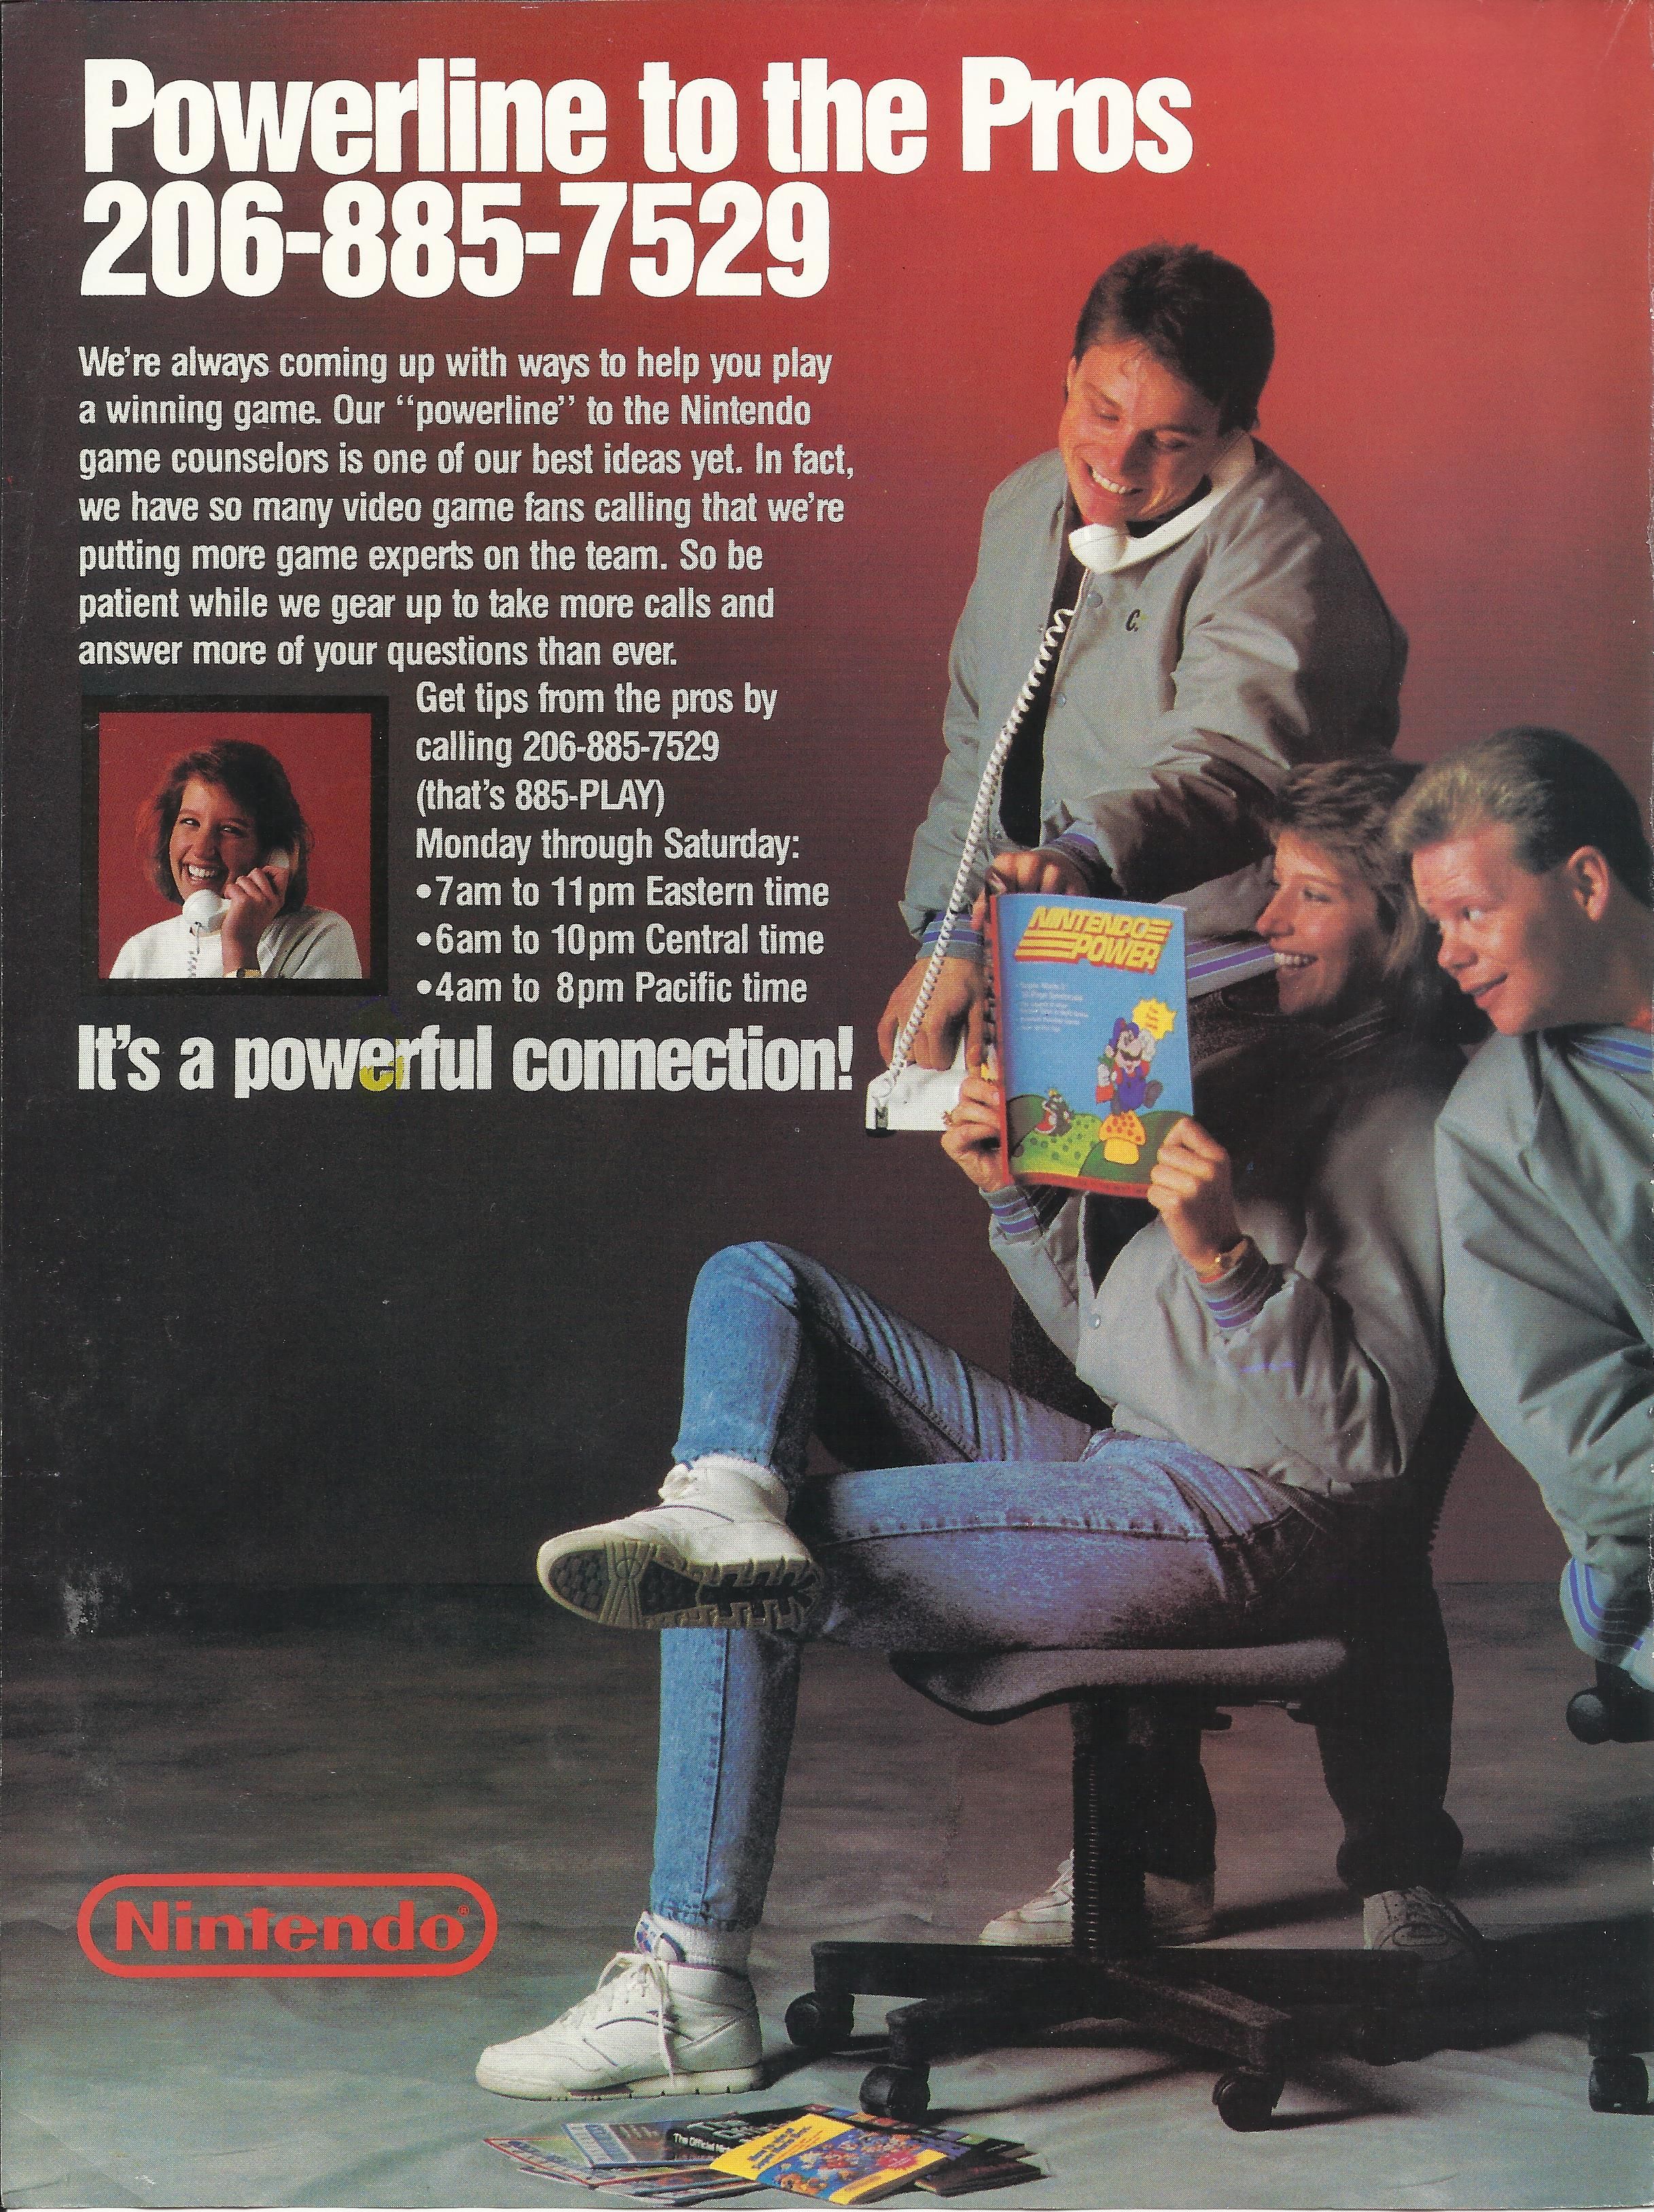 20 Awesome Things You Had NO IDEA The NES Could Do